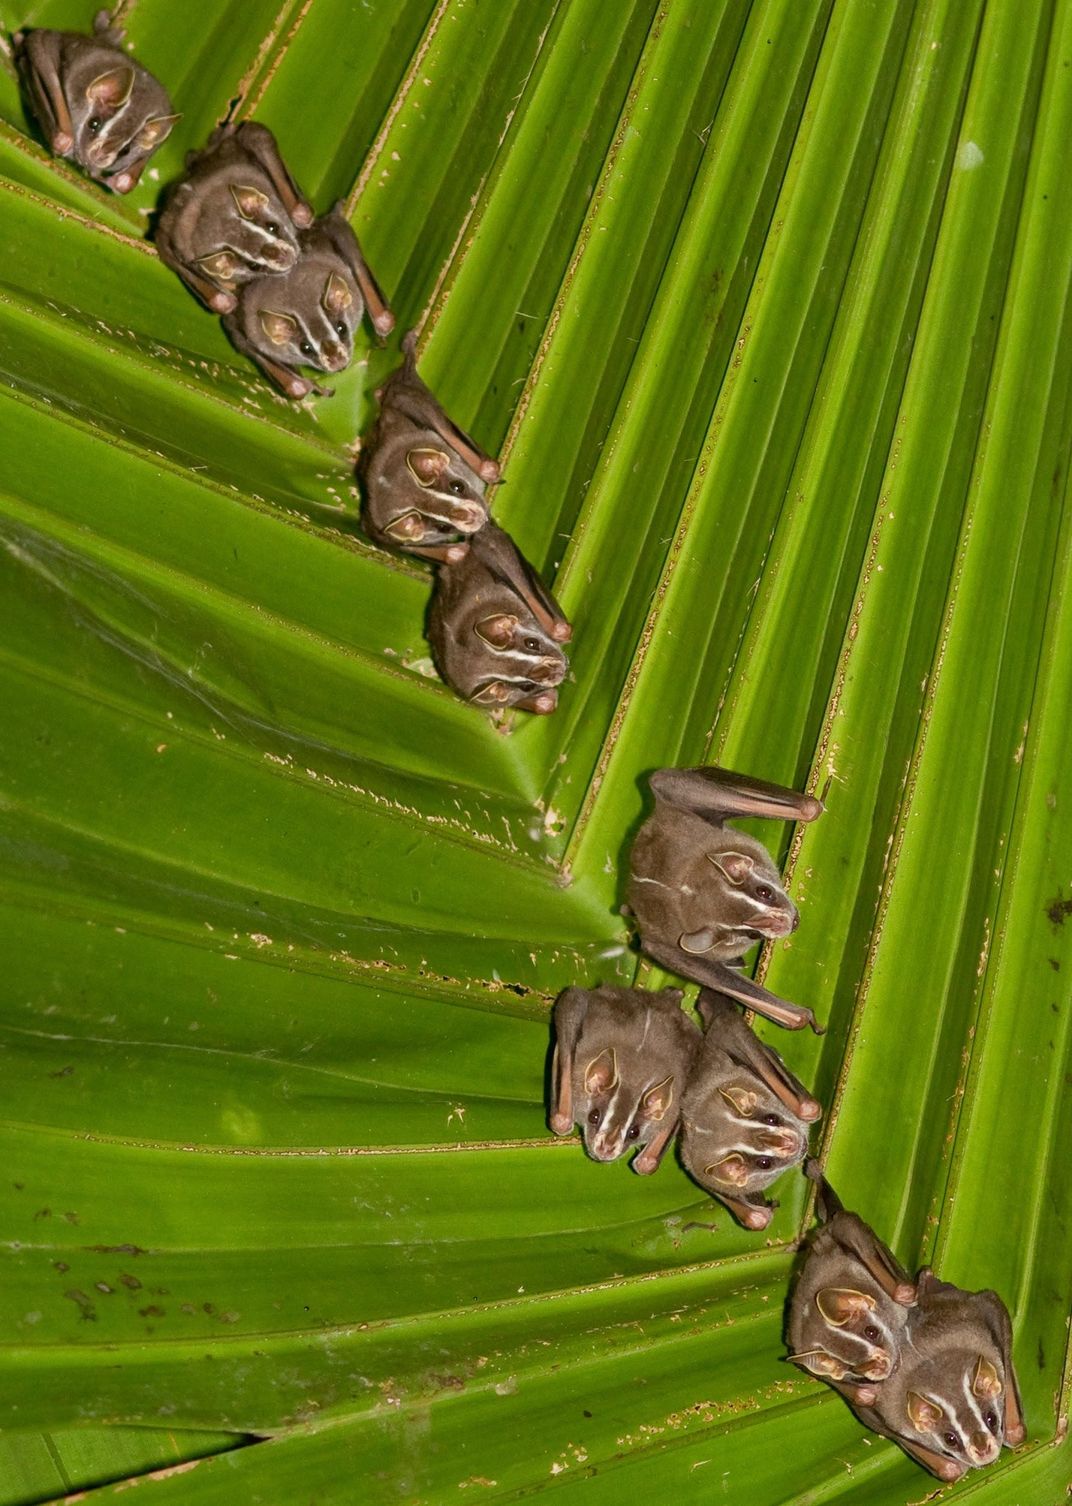 Small brown bats in the ridges of a green leaf.